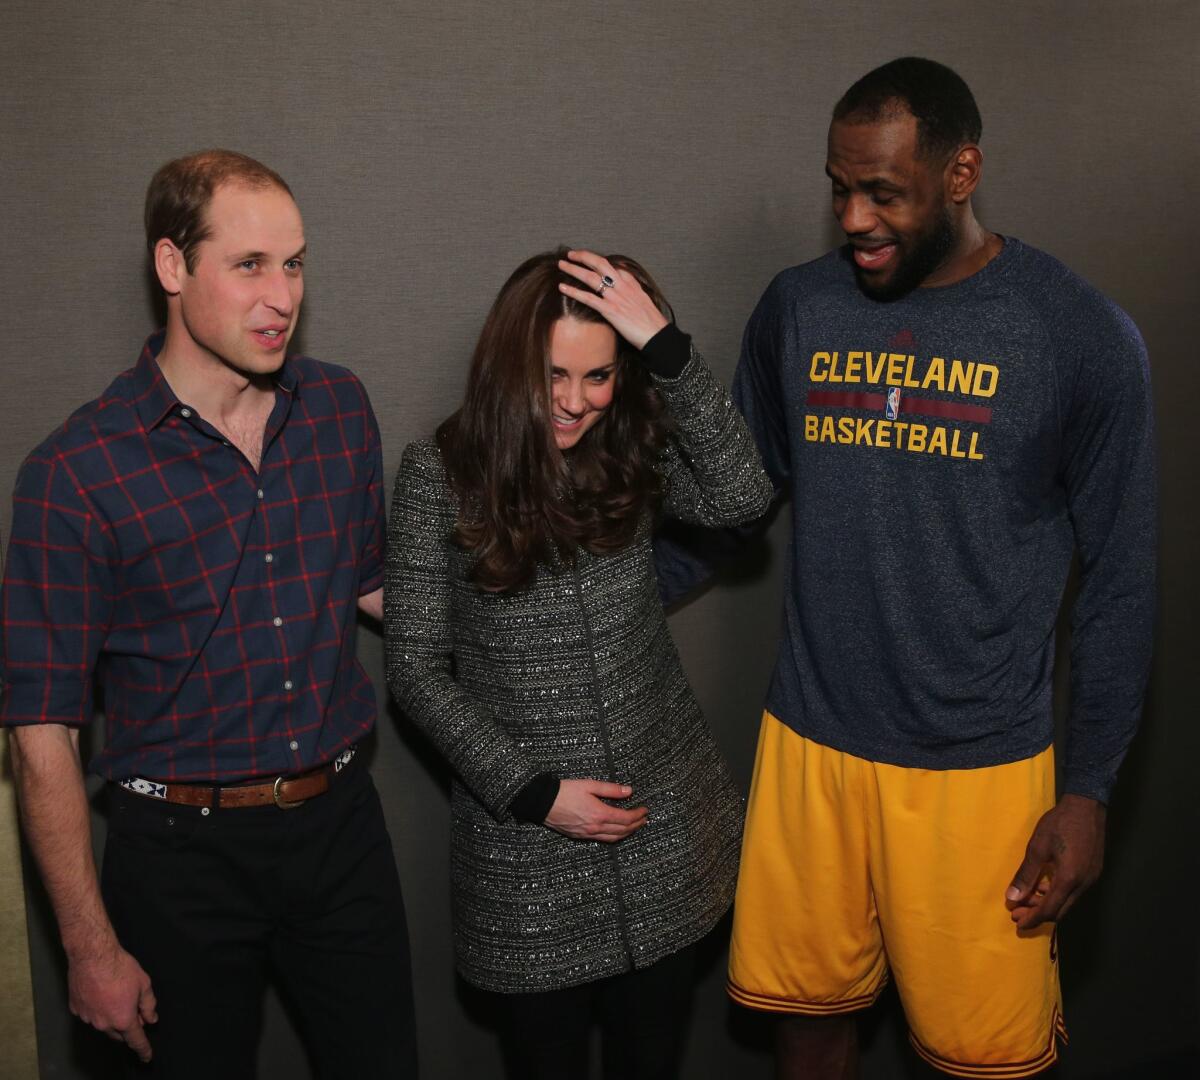 Prince William, Duke of Cambridge and Catherine, Duchess of Cambridge pose with LeBron James (R) backstage as they attend the Cleveland Cavaliers vs. Brooklyn Nets game at Barclays Center on December 8, 2014 in the Brooklyn borough of New York City.